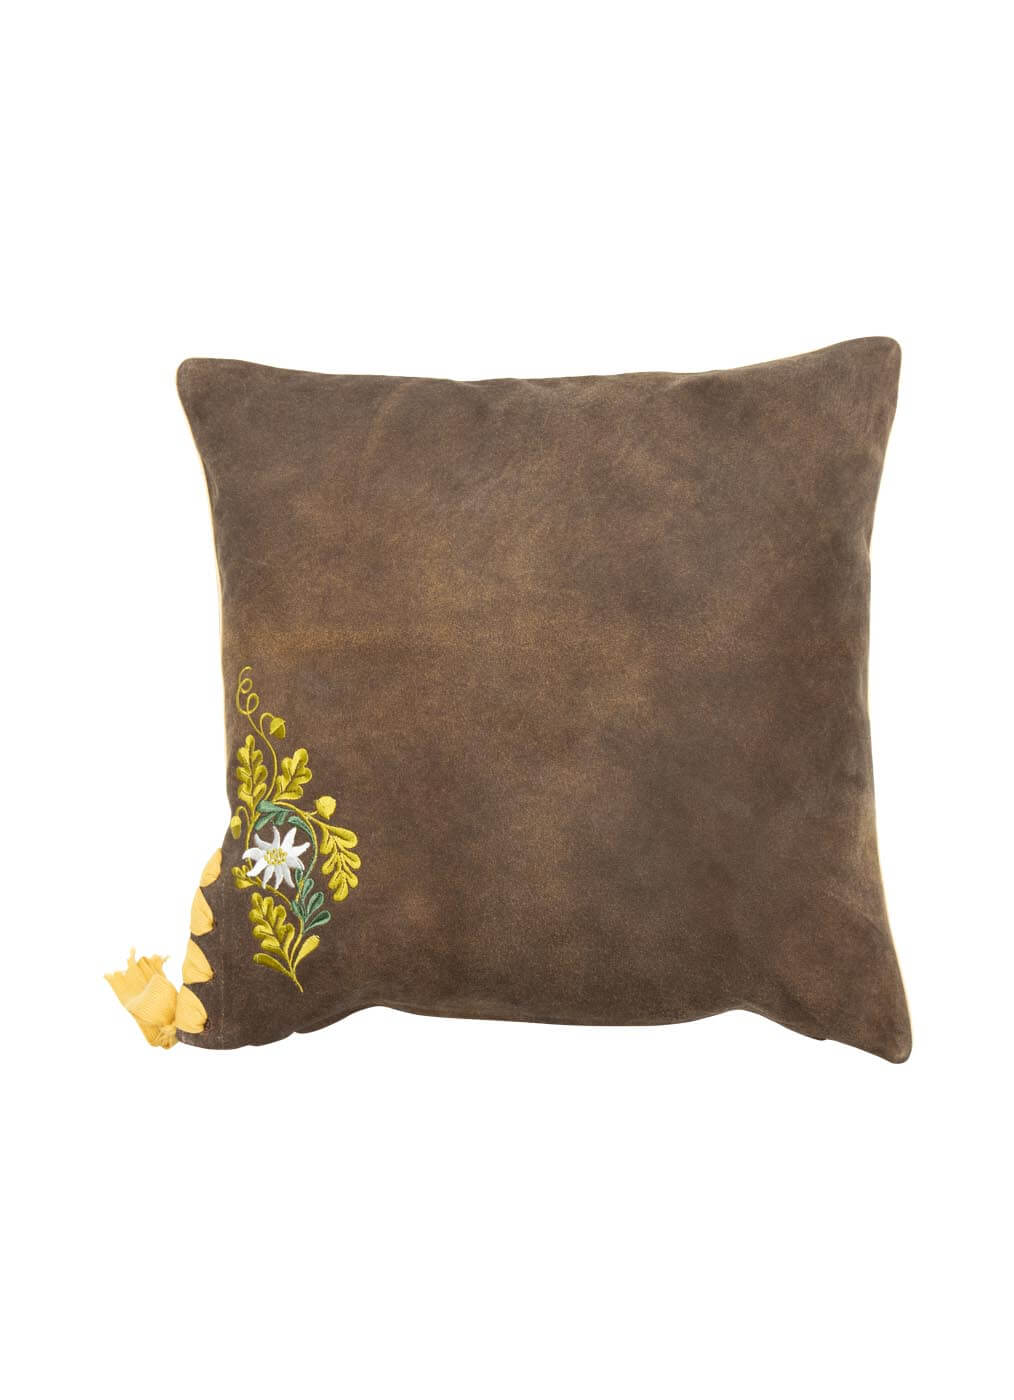 Loden/Leather Pillow “Almwiese”, maple